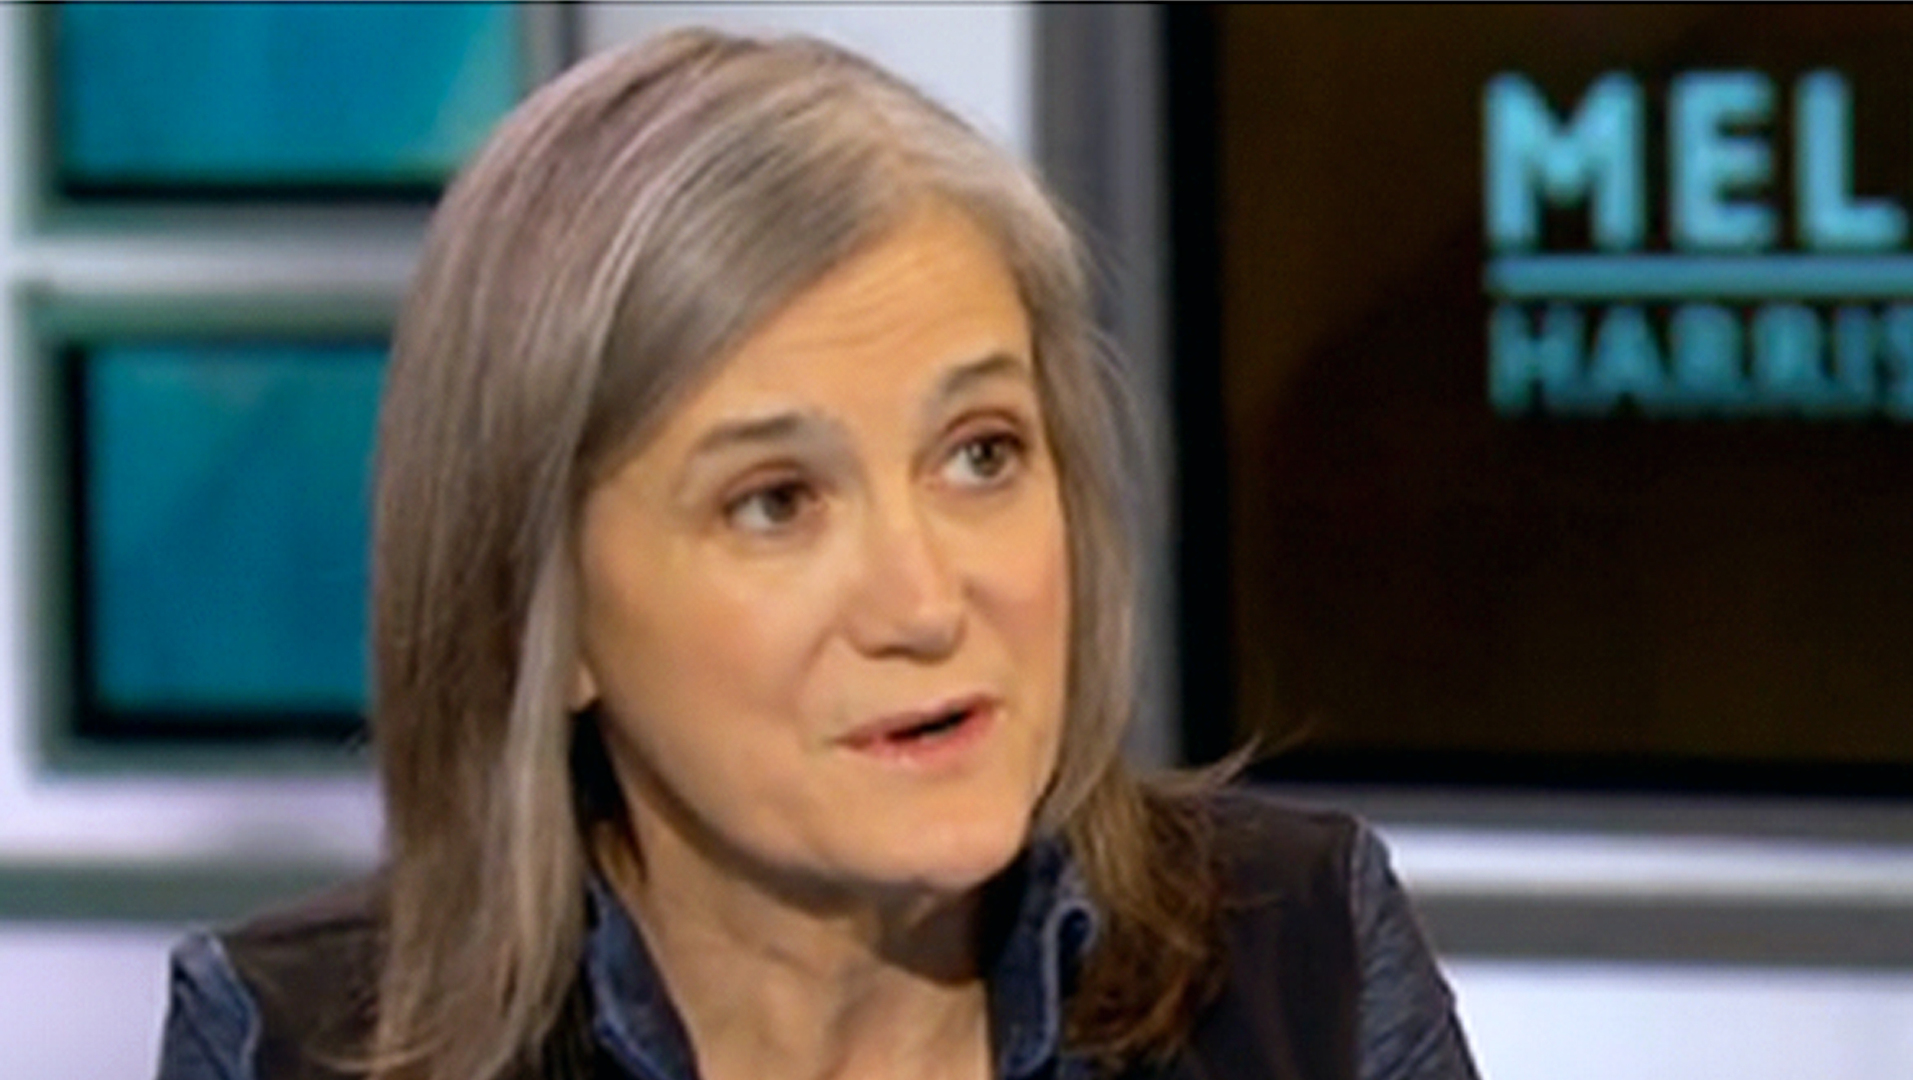 WATCH: Amy Goodman Discusses Donald Trump on MSNBC’s NOW with Alex Wagner ...1913 x 1080